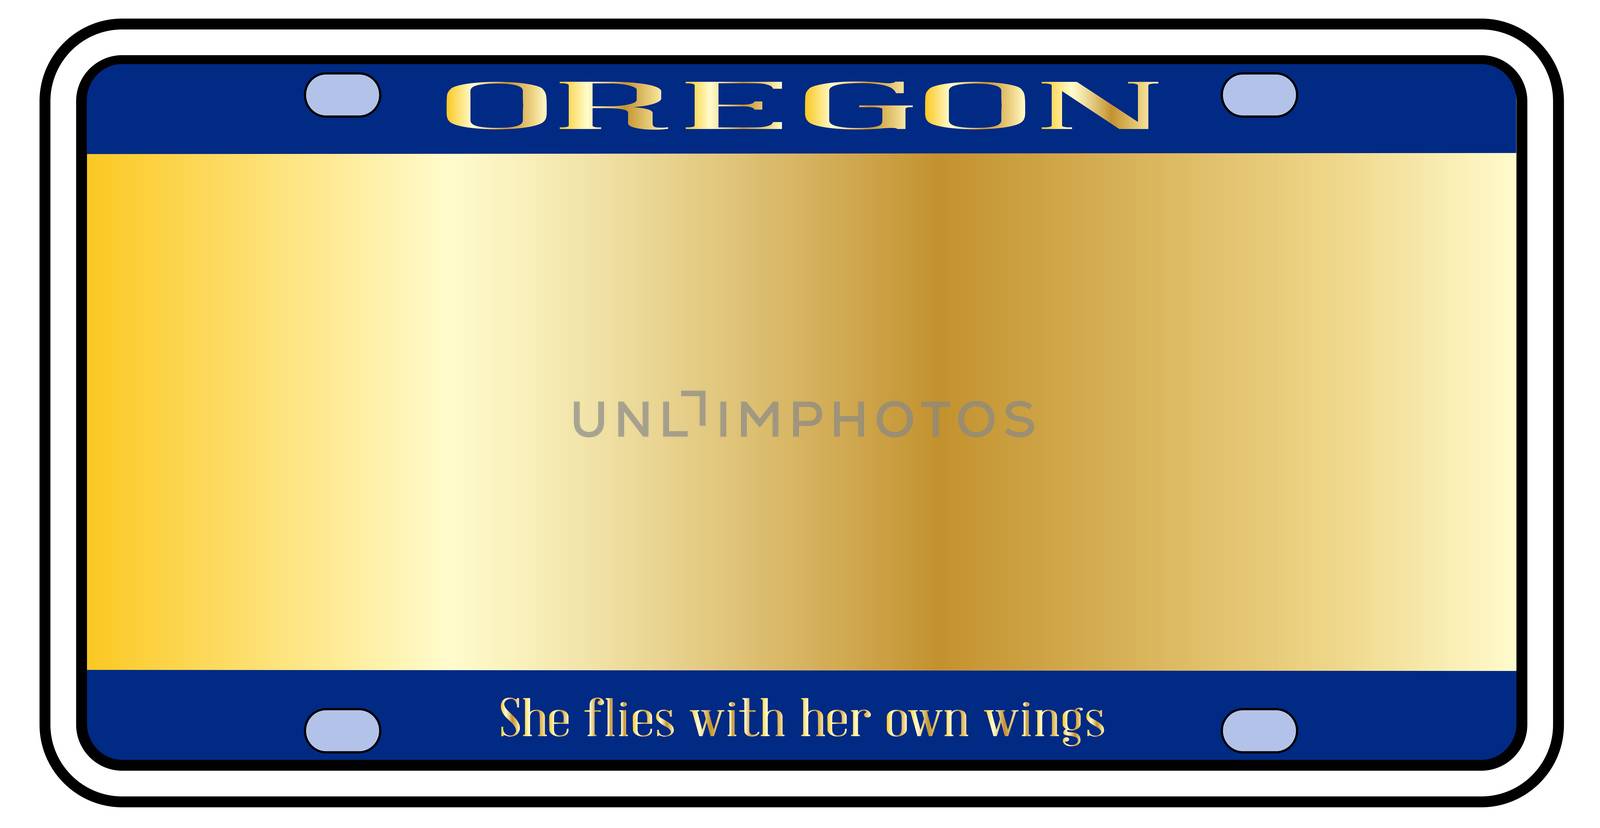 Blank Oregon state license plate in the colors of the state flag over a white background